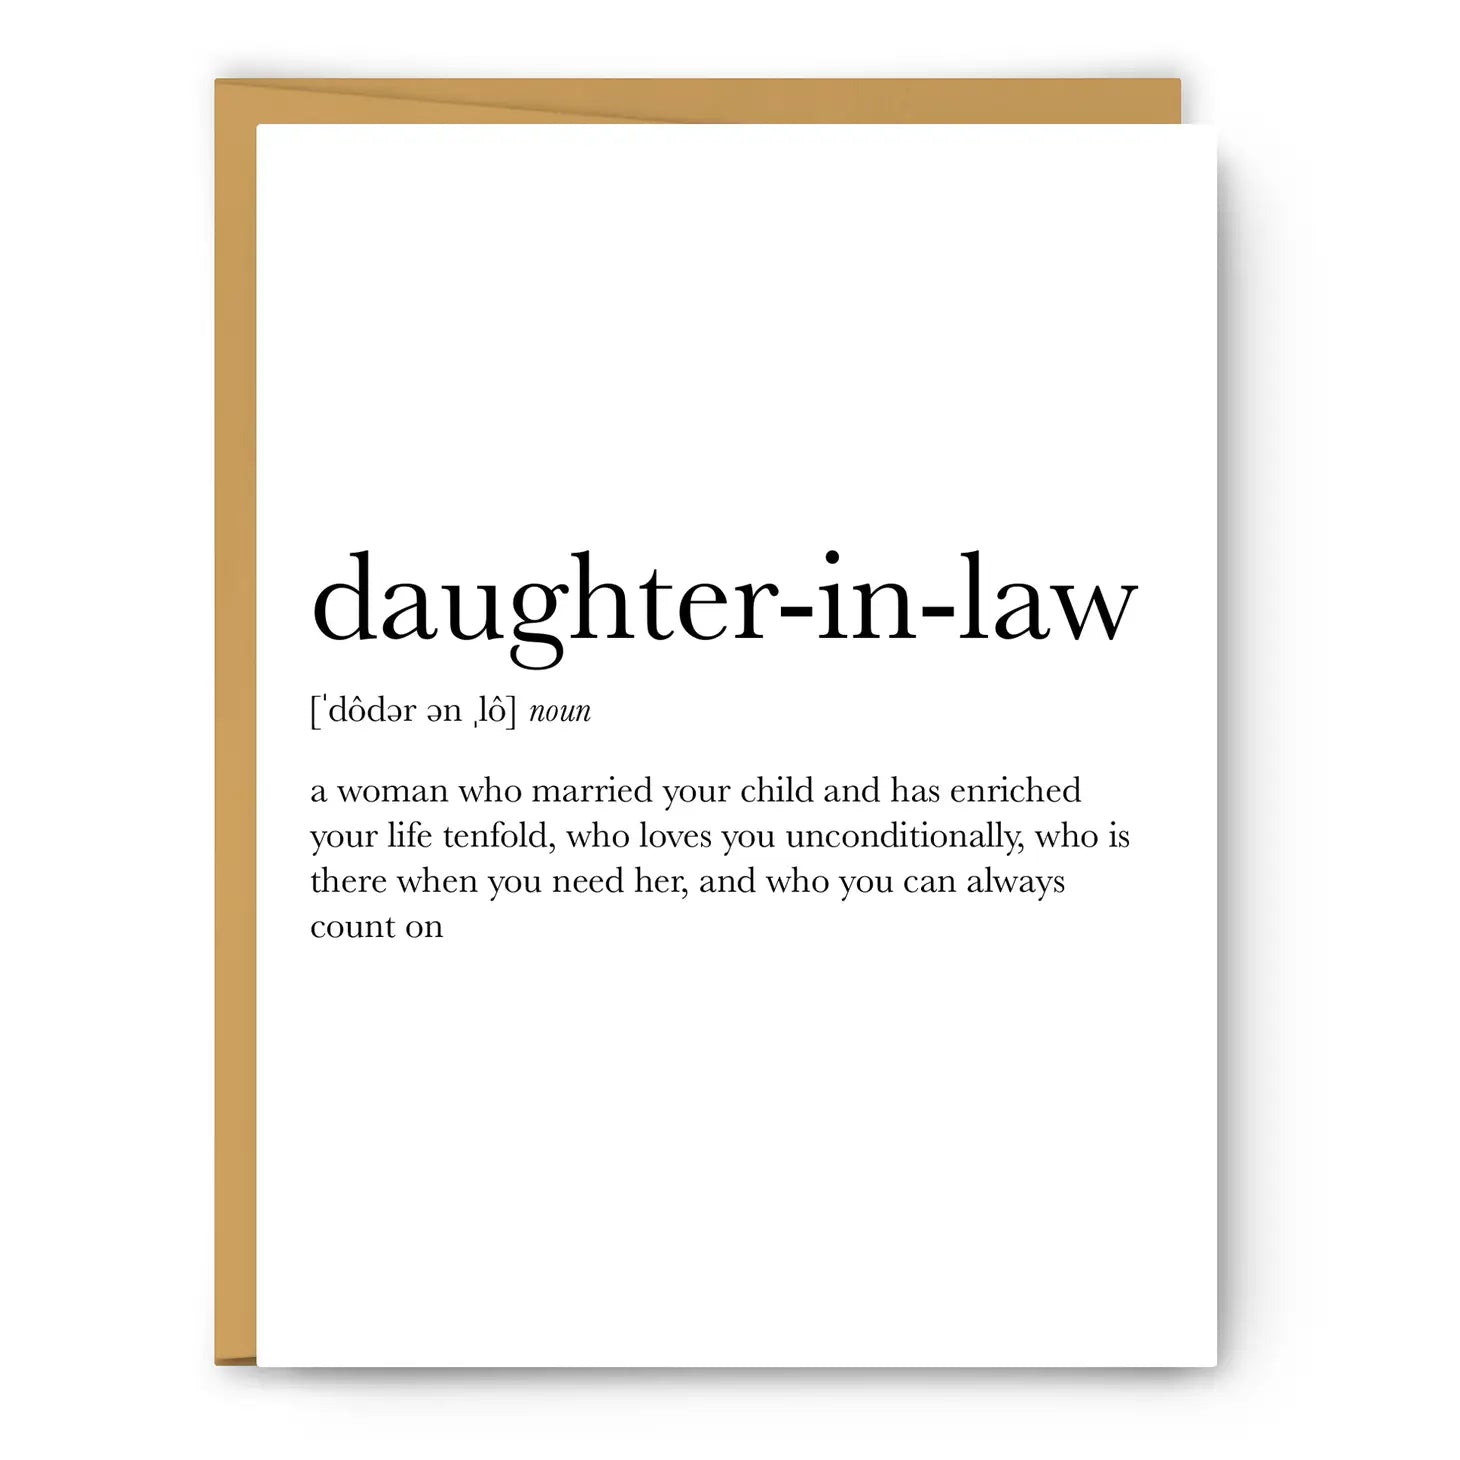 Daughter-In-Law Definition - Everyday Card